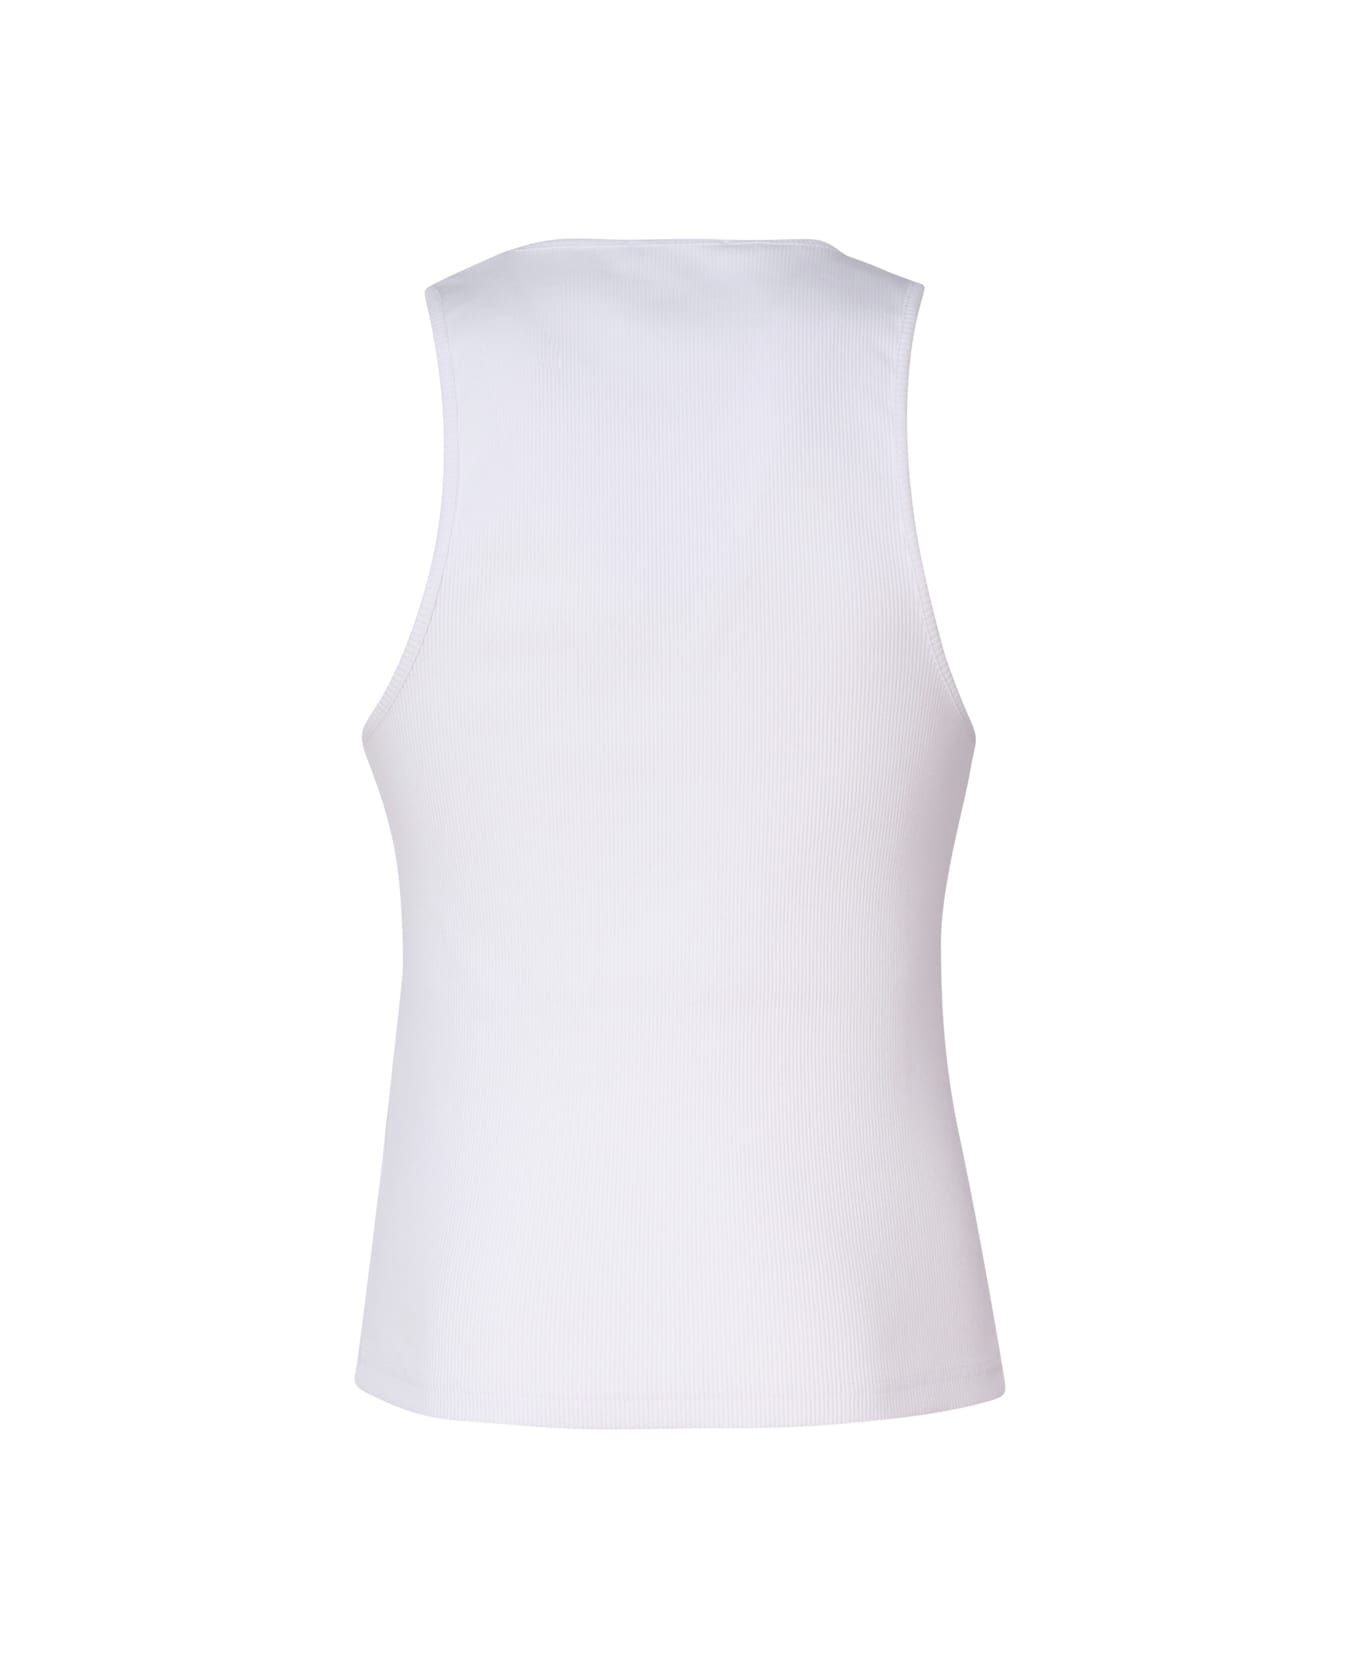 J.W. Anderson Anchor Tank Top With Embroidery - White タンクトップ